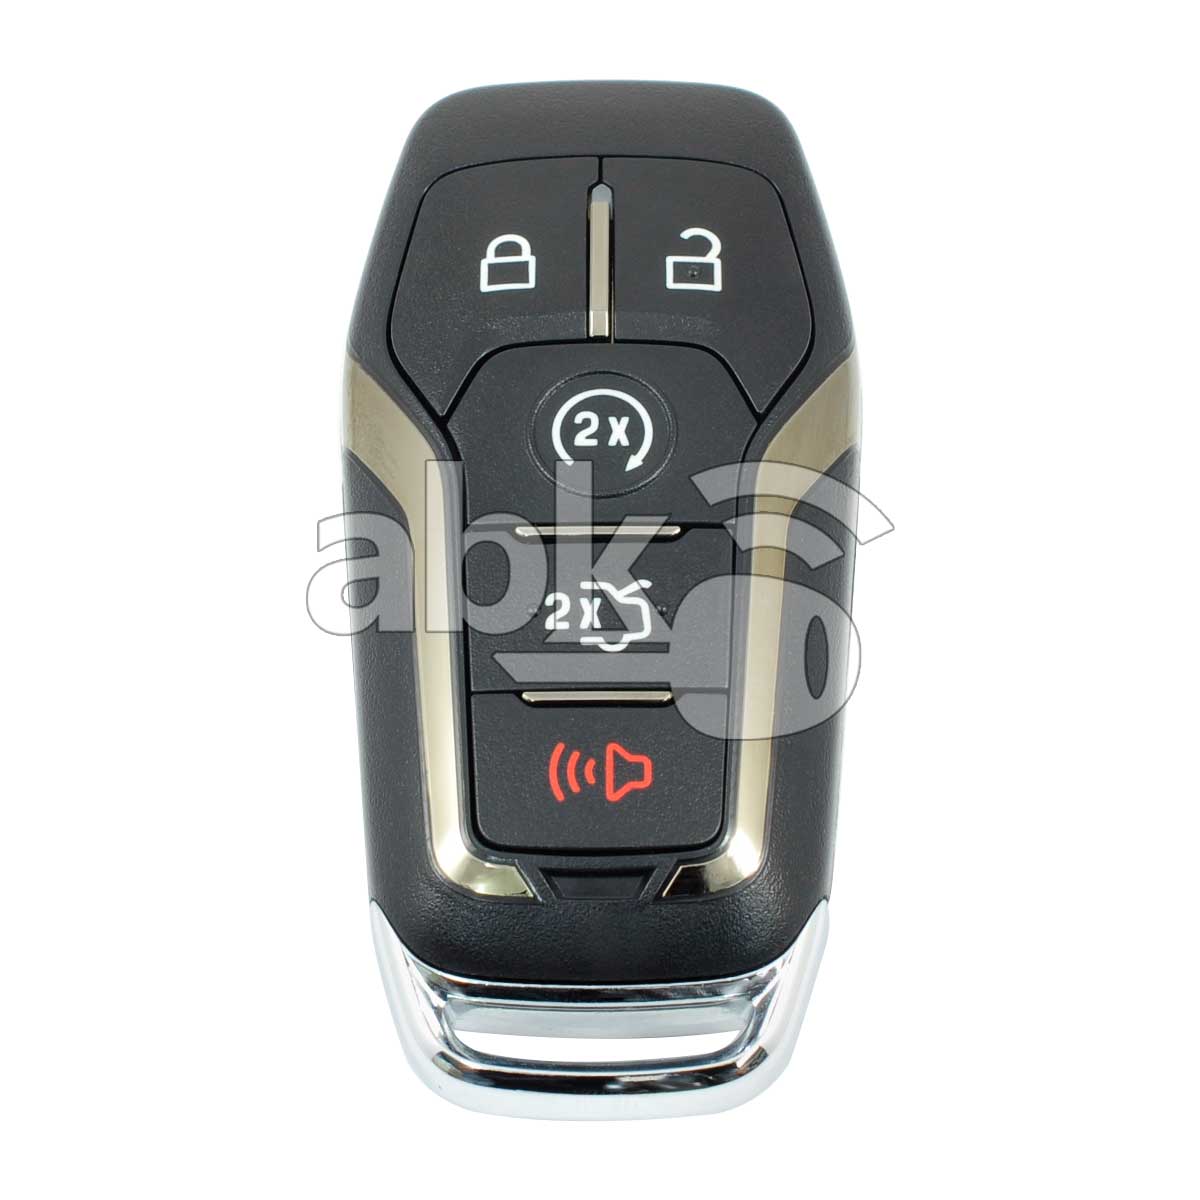 Genuine Lincoln MKC MKX 2014+ Smart Key 5Buttons M3N-A2C31243300 902MHz 5925313 5923898 - ABK-3791 -